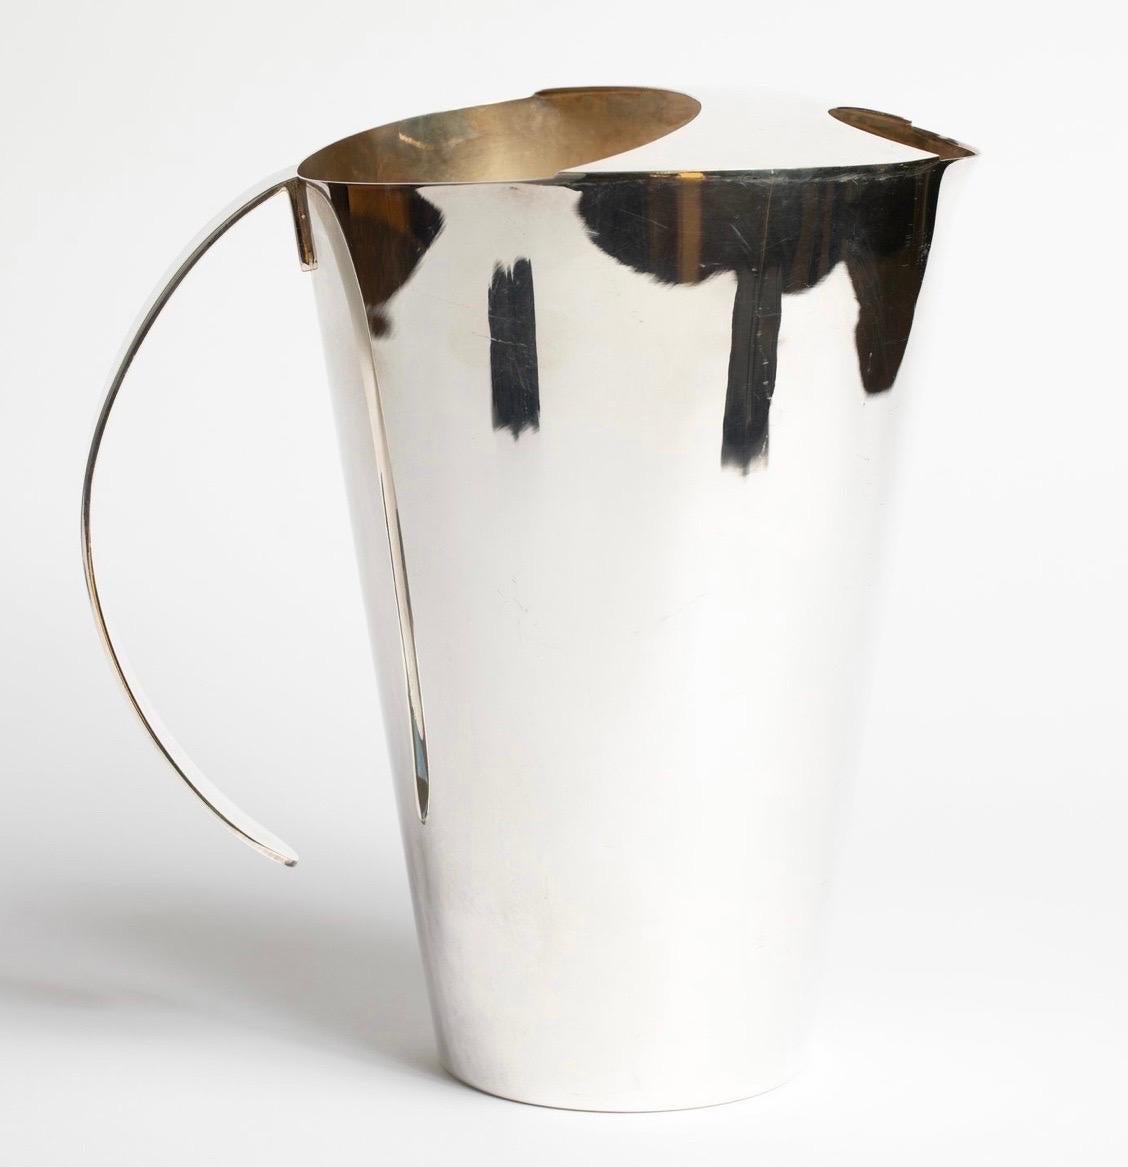 A Wonderful Pair Of Swid Powell / Calvin TsAO and Zack McKown Silver Plated Water Pitchers With A Sleek Conical Form With Flat Curving Handle And Ice Guard, This Beautiful Modern Pitcher Was Made In Italy.
DIMENSIONS: 9 1/8